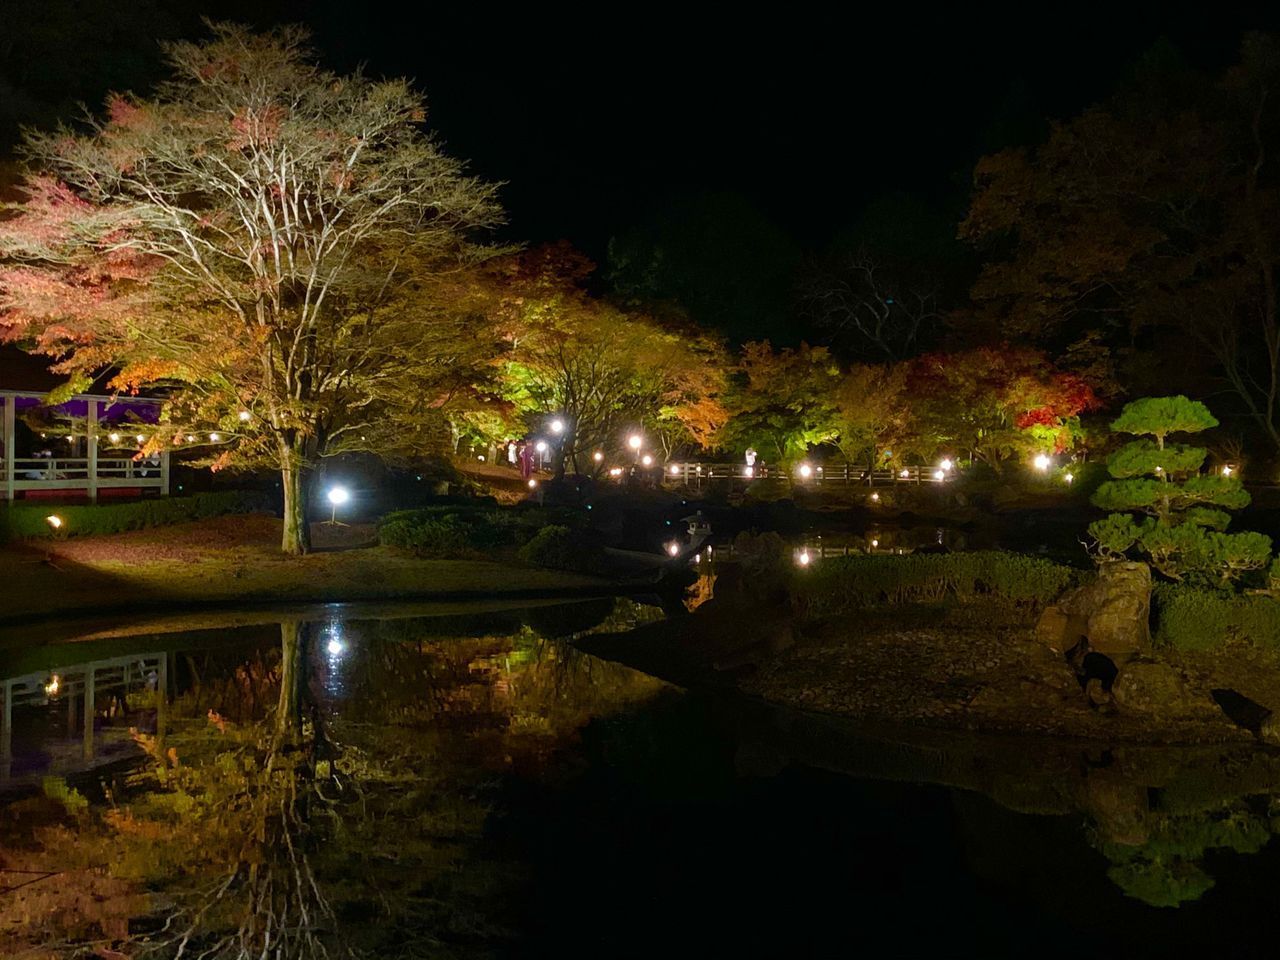 VIEW OF ILLUMINATED TREES BY RIVER AT NIGHT